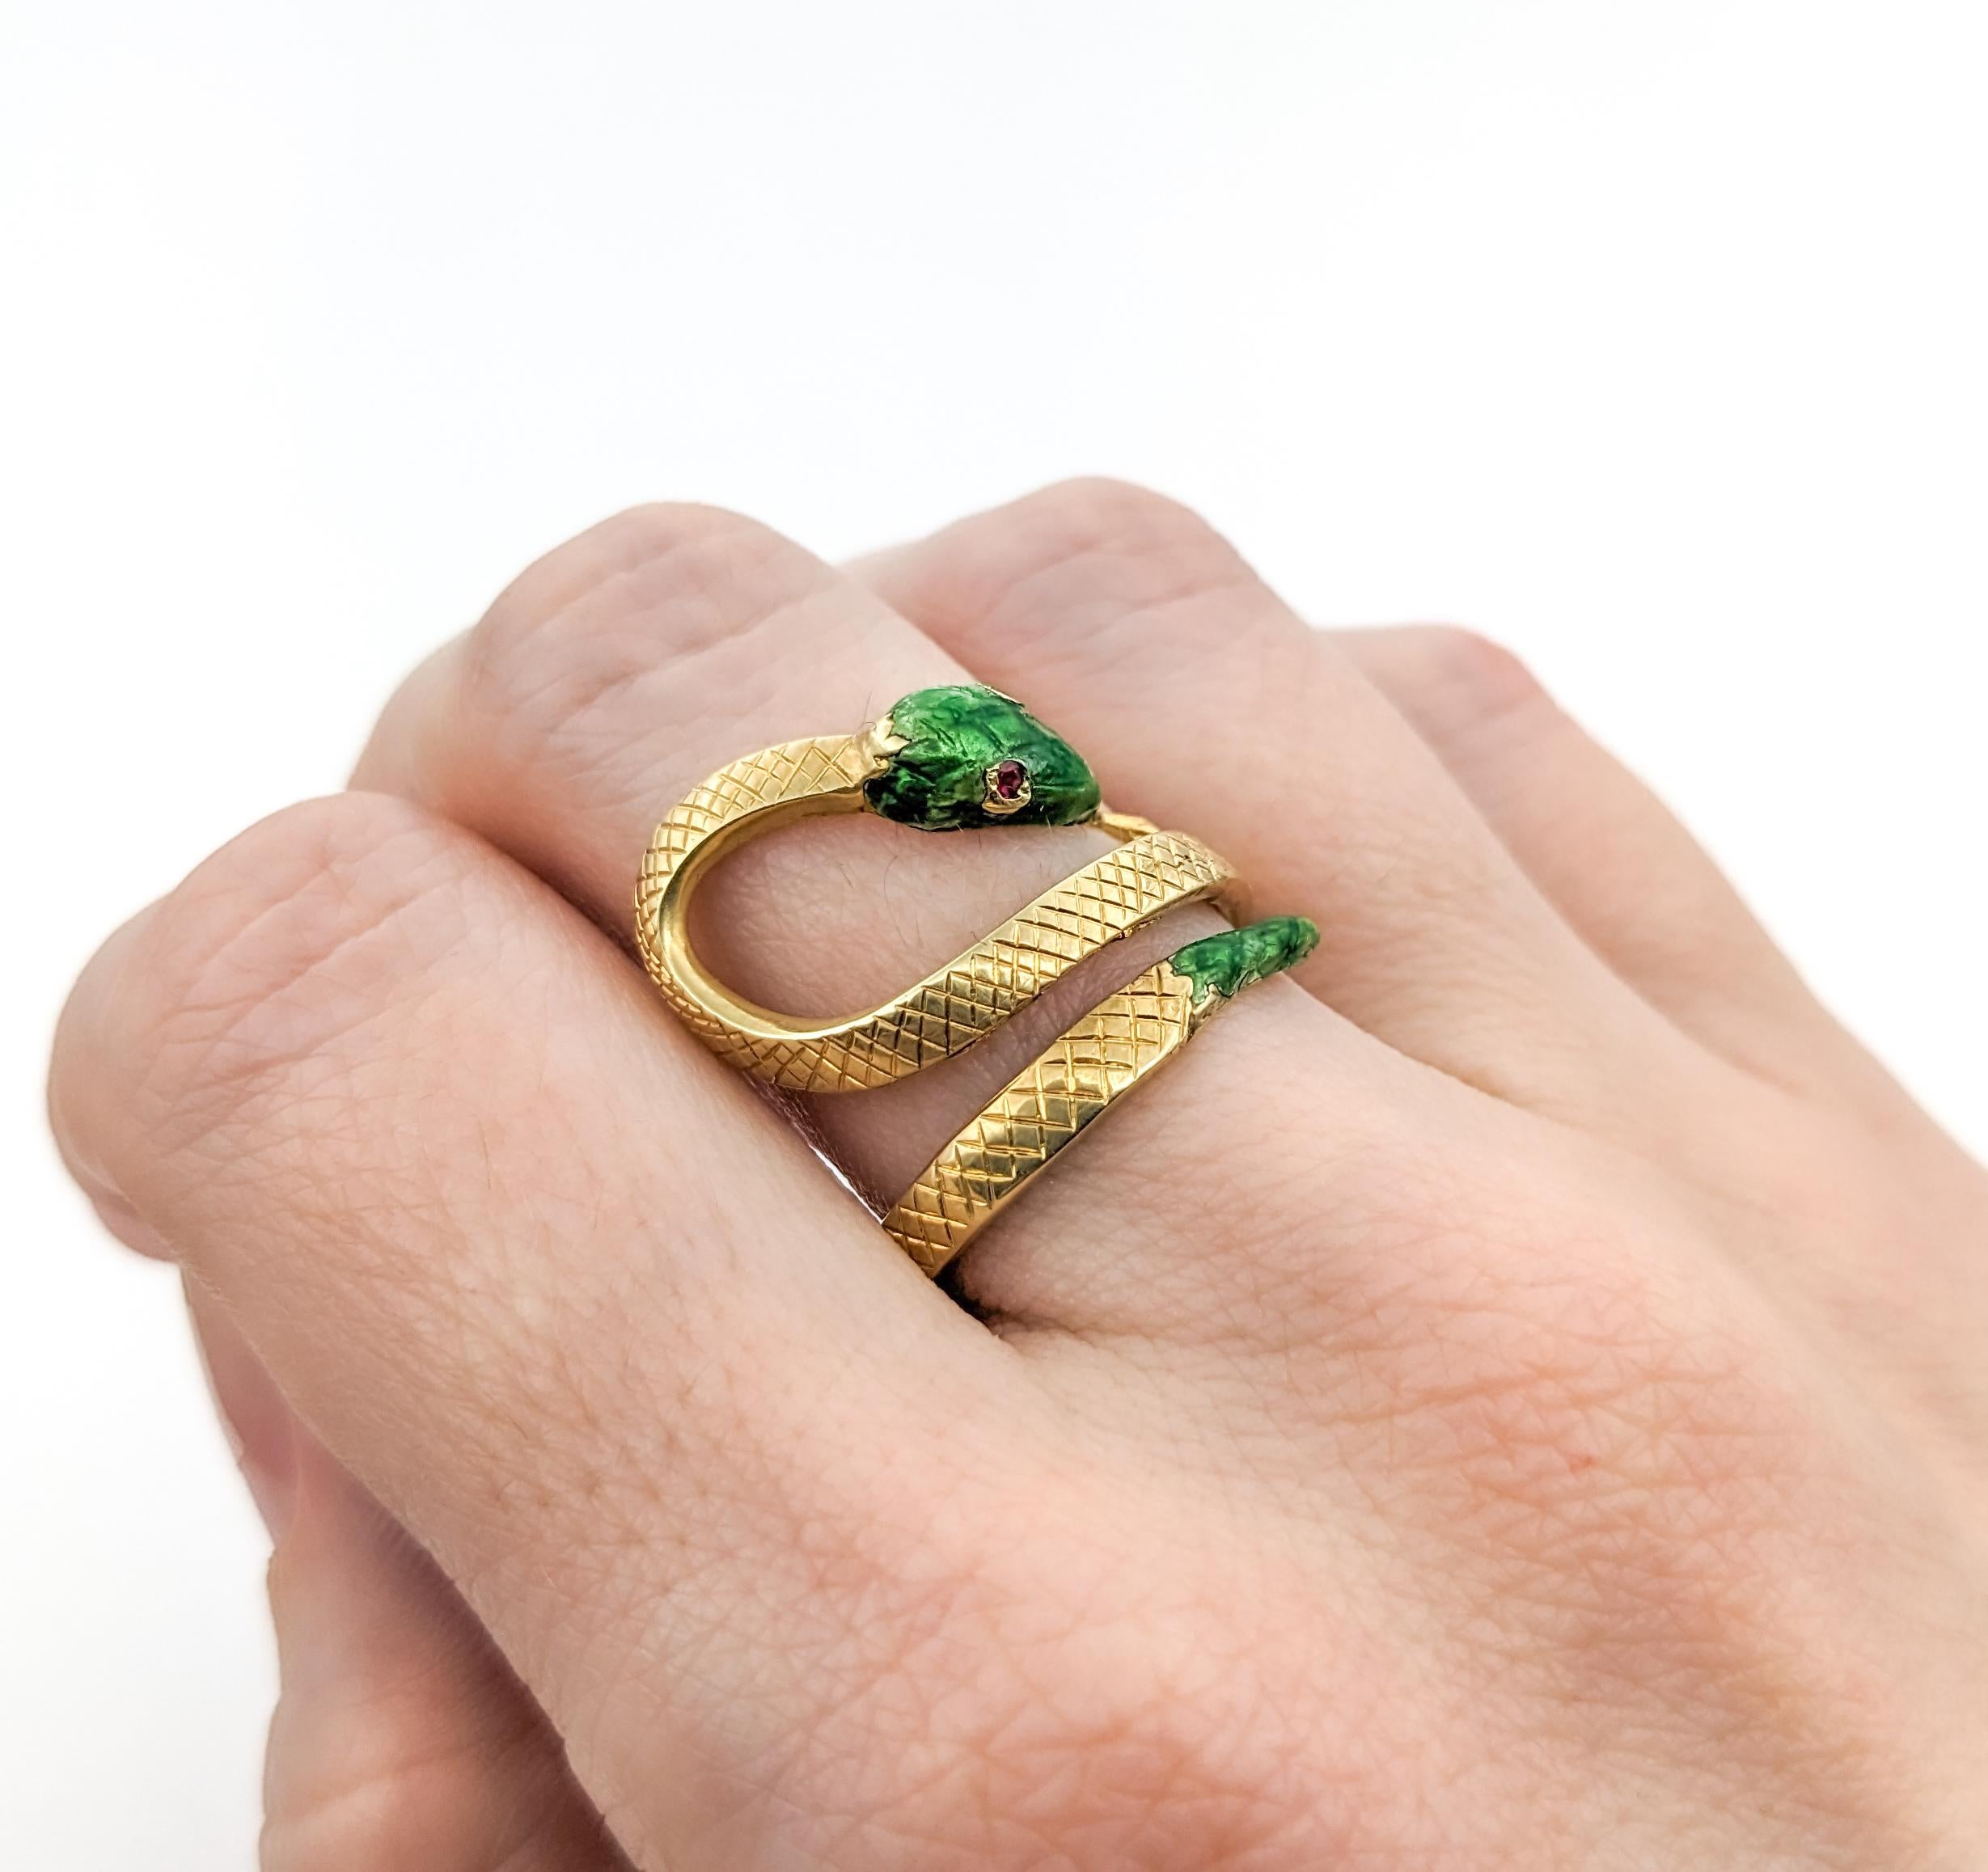 Vintage Green Enamel Snake Ring with Ruby Eyes In Yellow Gold For Sale 2